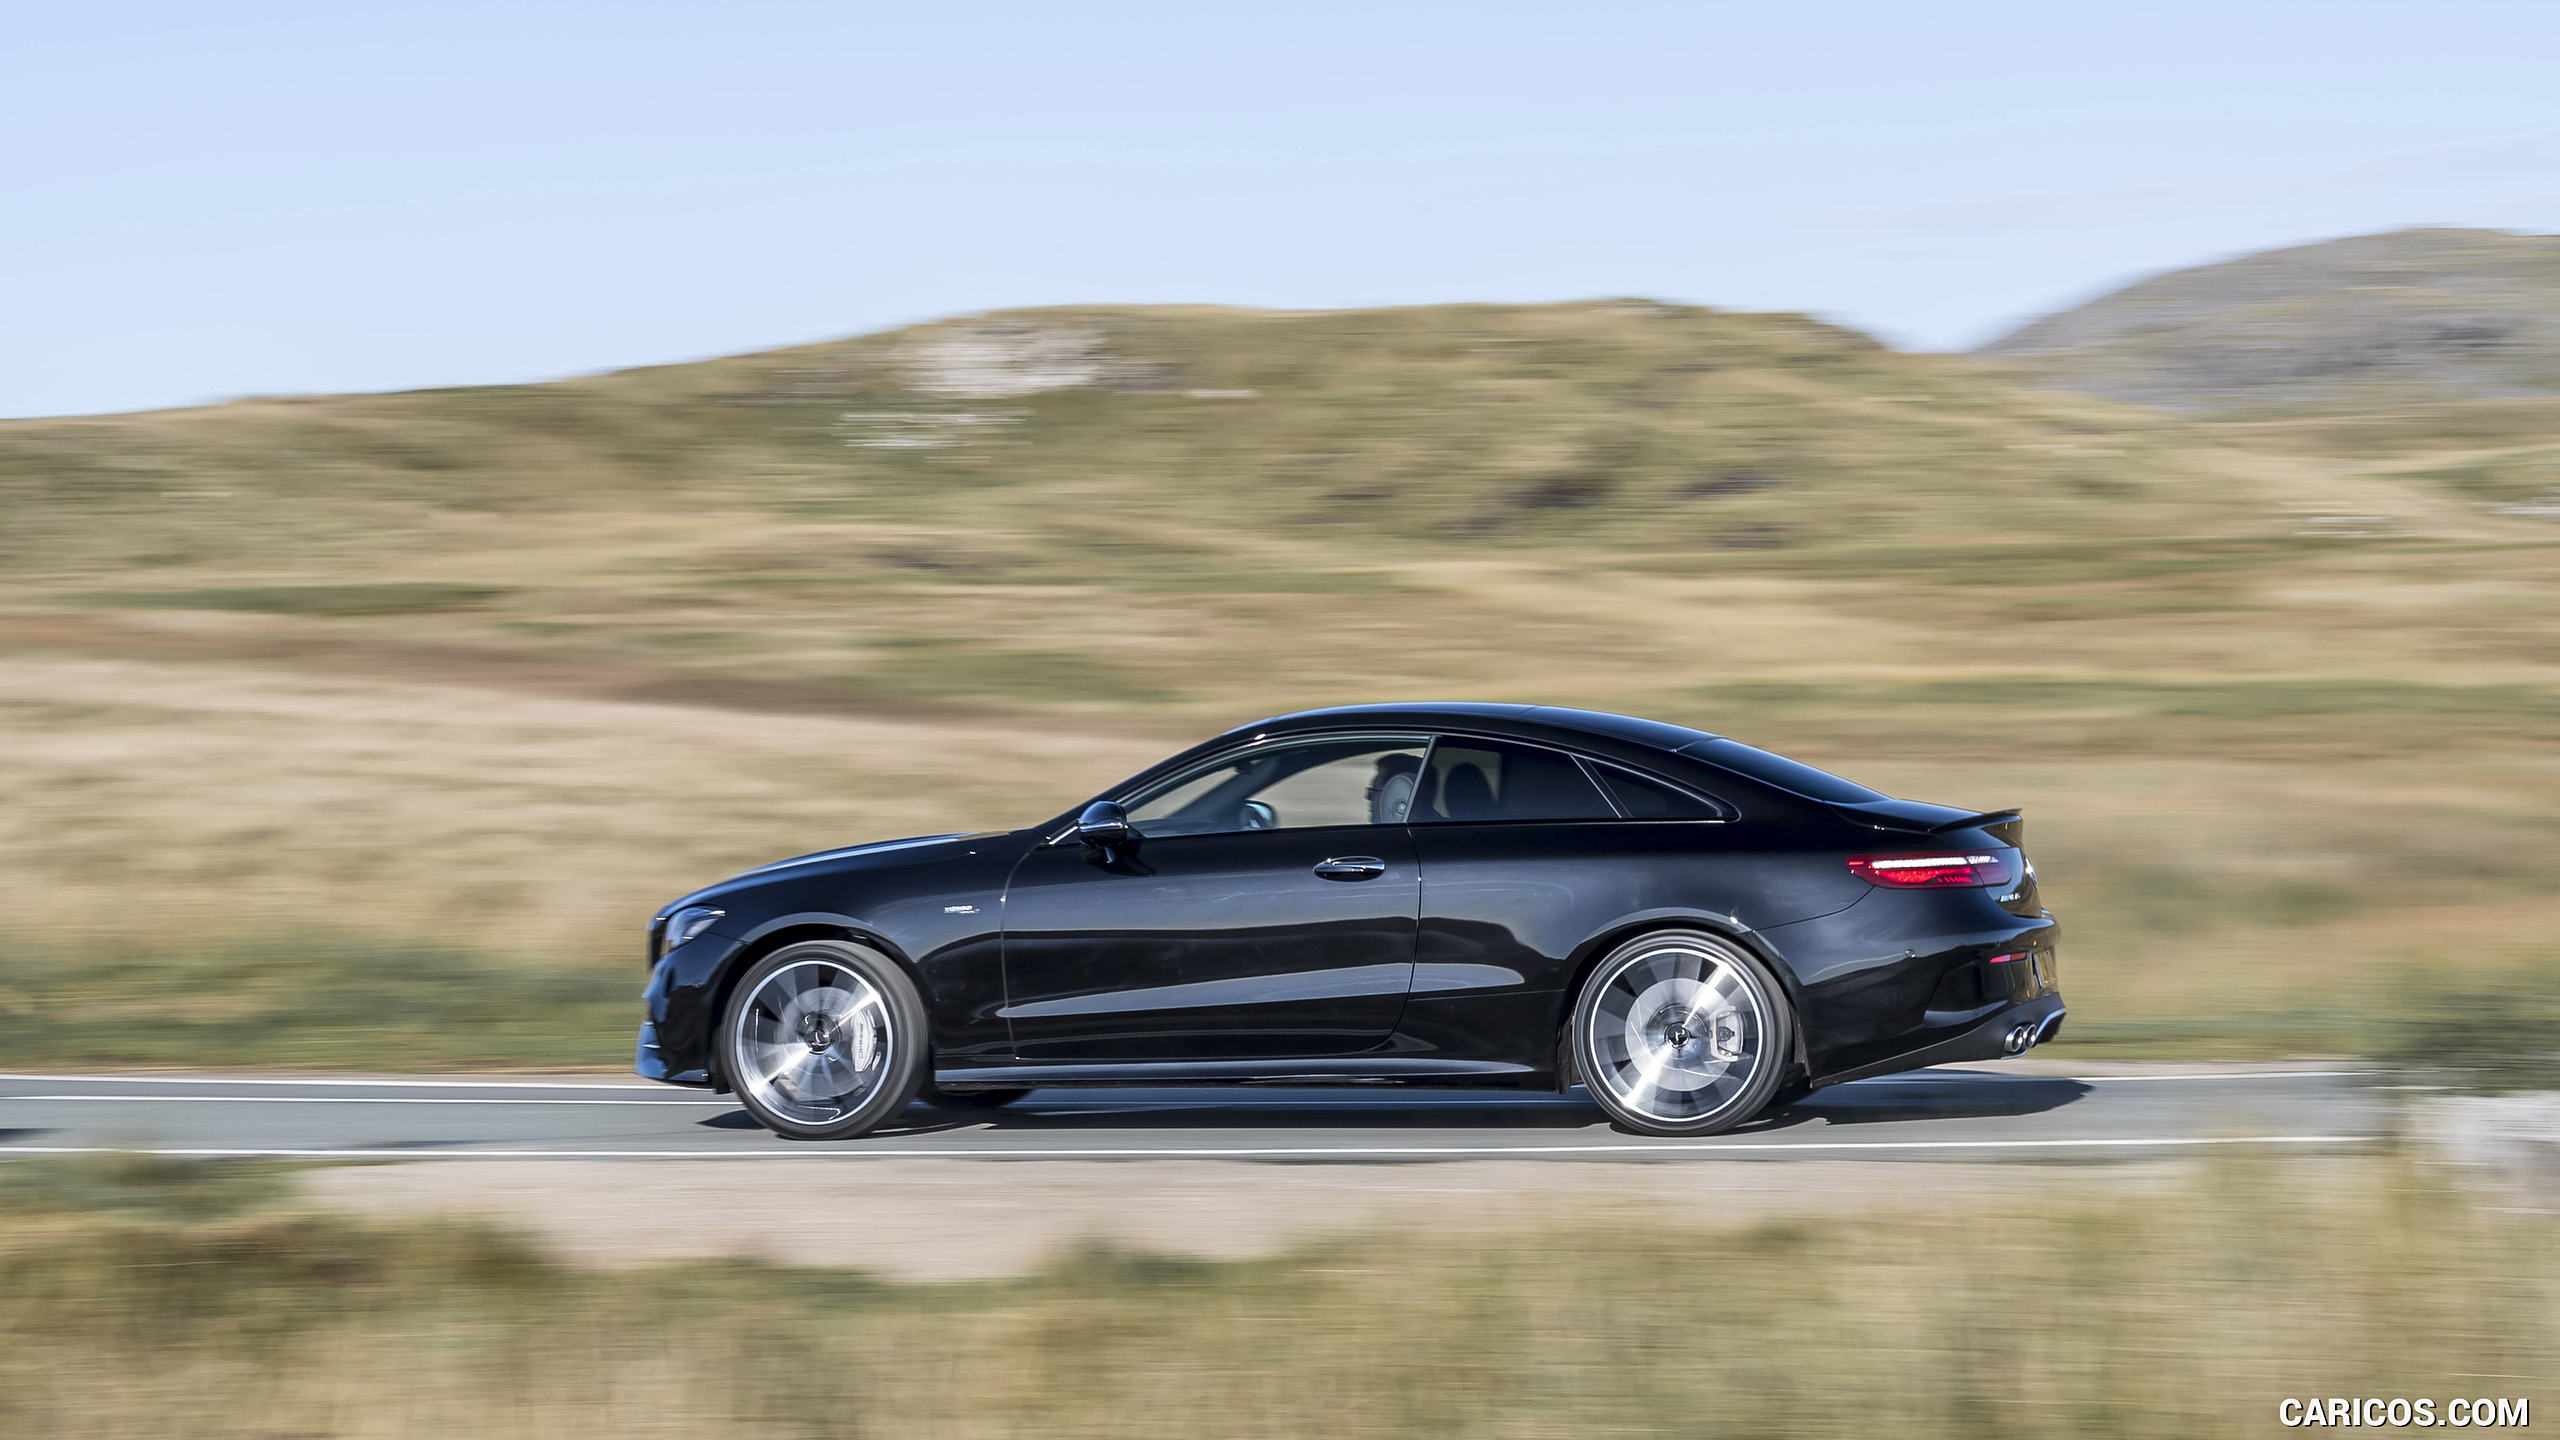 2019 Mercedes-AMG E 53 Coupe (UK-Spec) - Side, #18 of 166